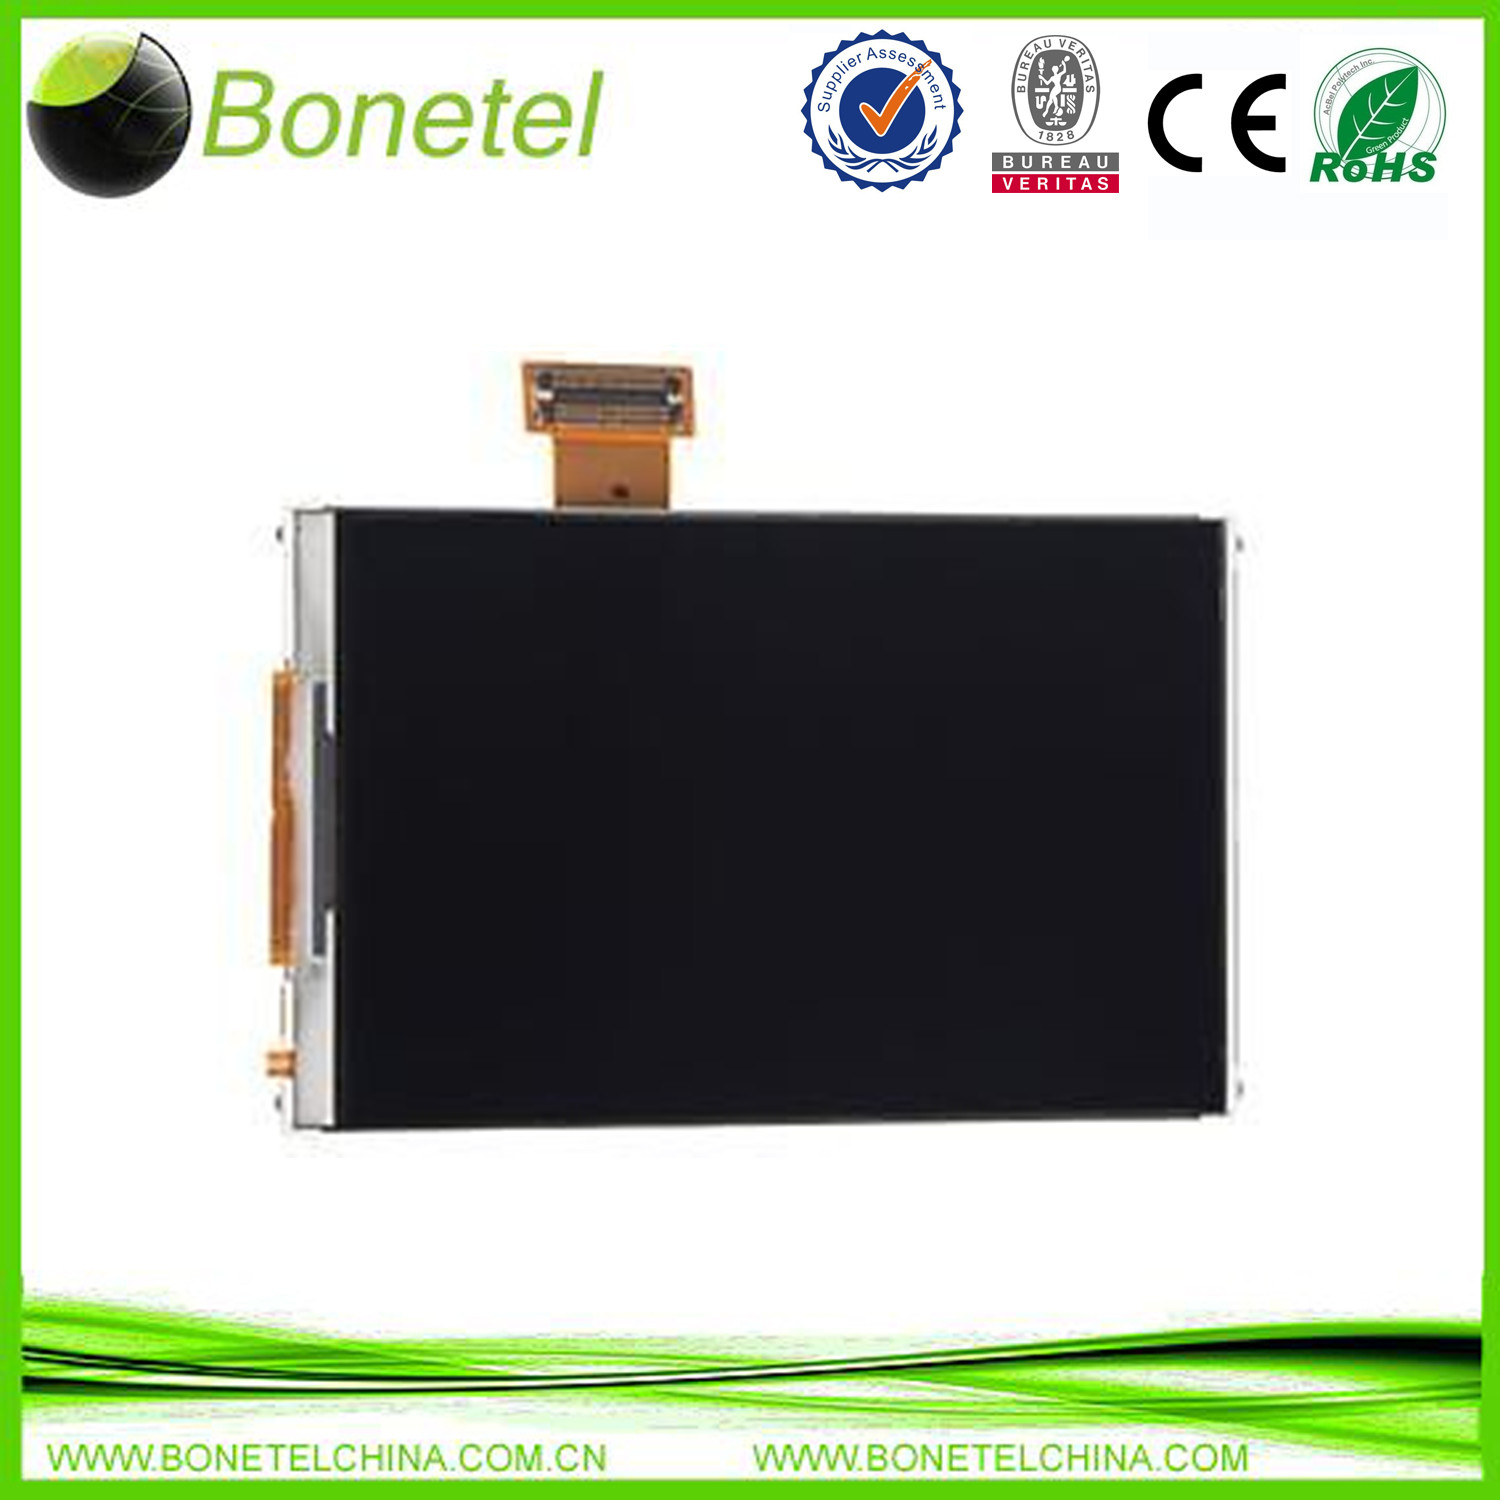 LCD Screen Display Monitor Replacement Repair for Samsung Galaxy Ace S5830